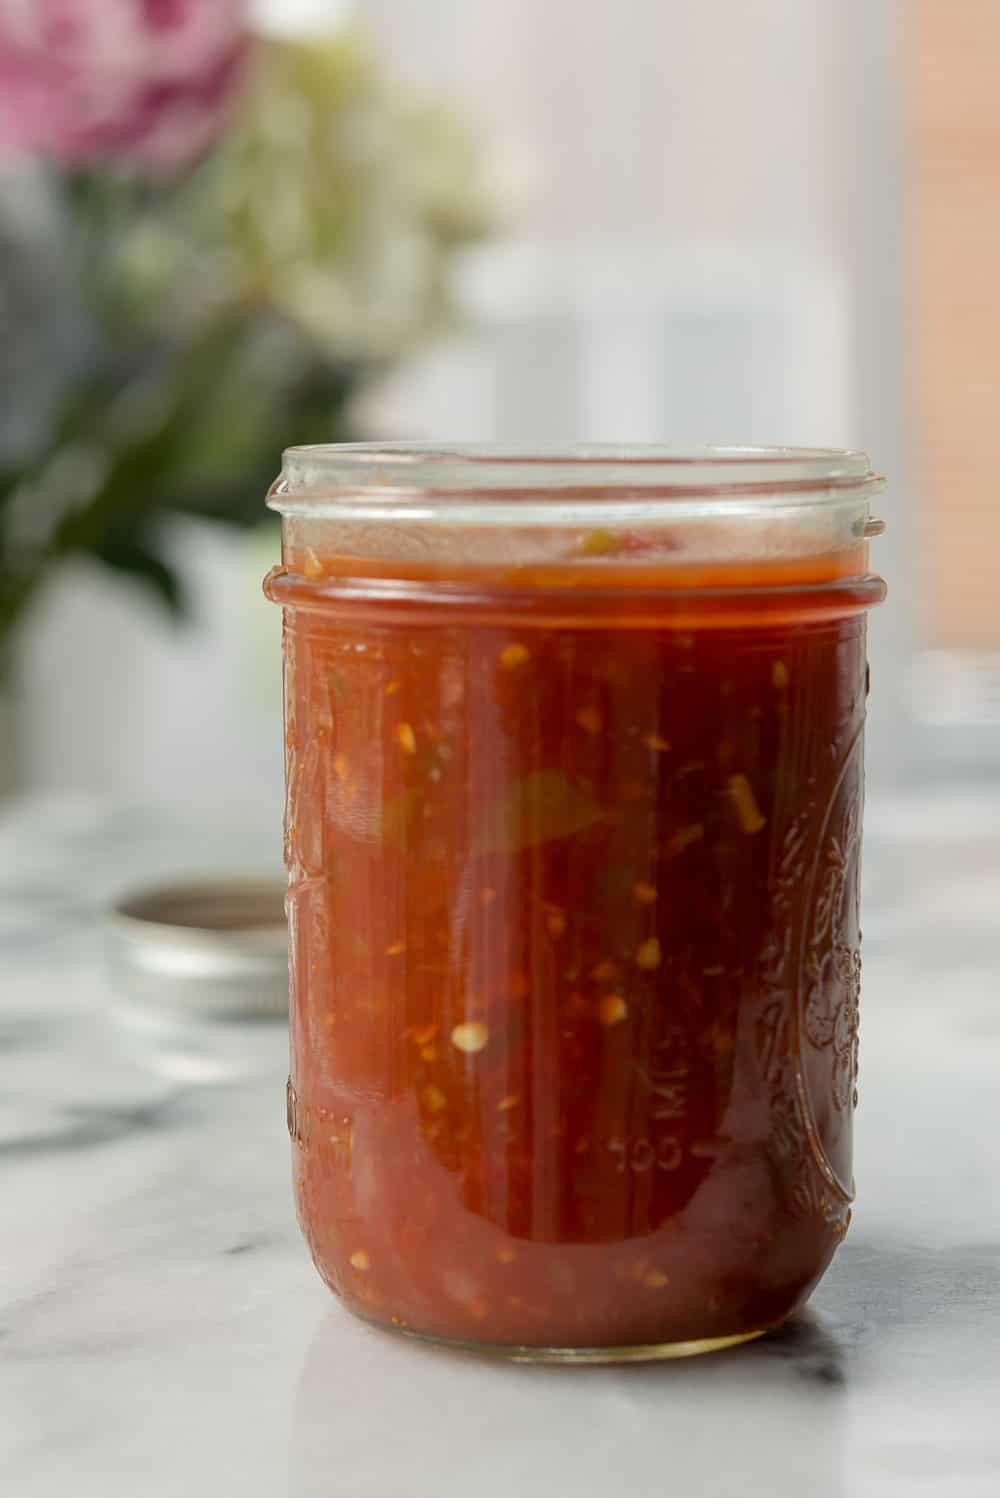 Homemade Salsa Recipe For Canning
 The Best Homemade Salsa for Canning Delish Knowledge